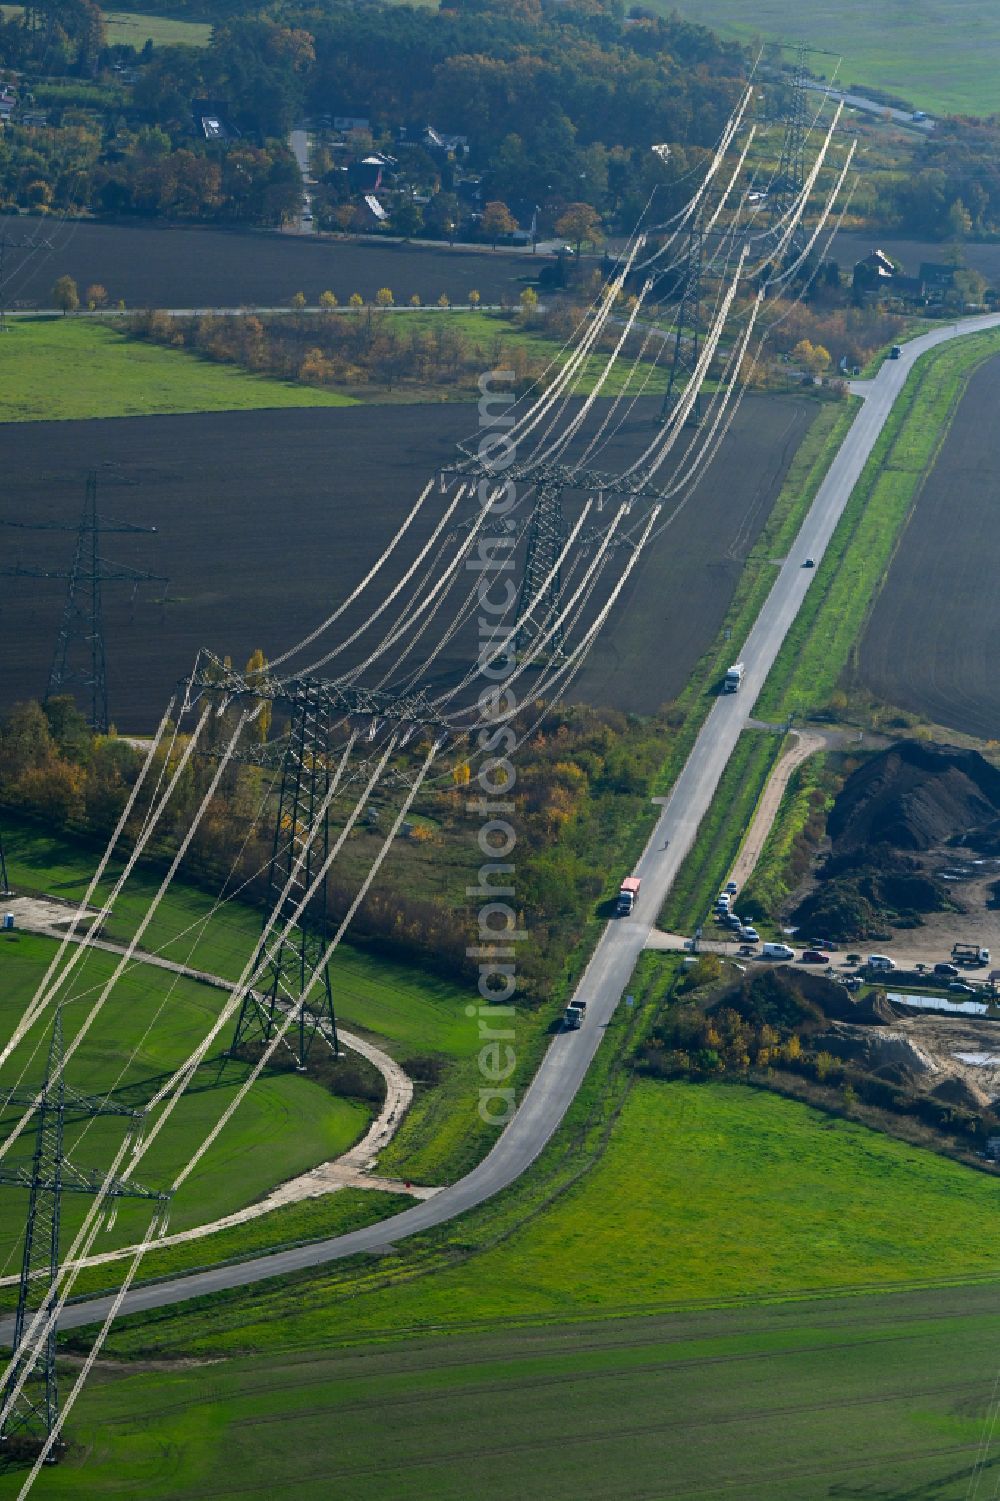 Altlandsberg from the bird's eye view: Current route of the power lines and pylons in Altlandsberg in the state Brandenburg, Germany